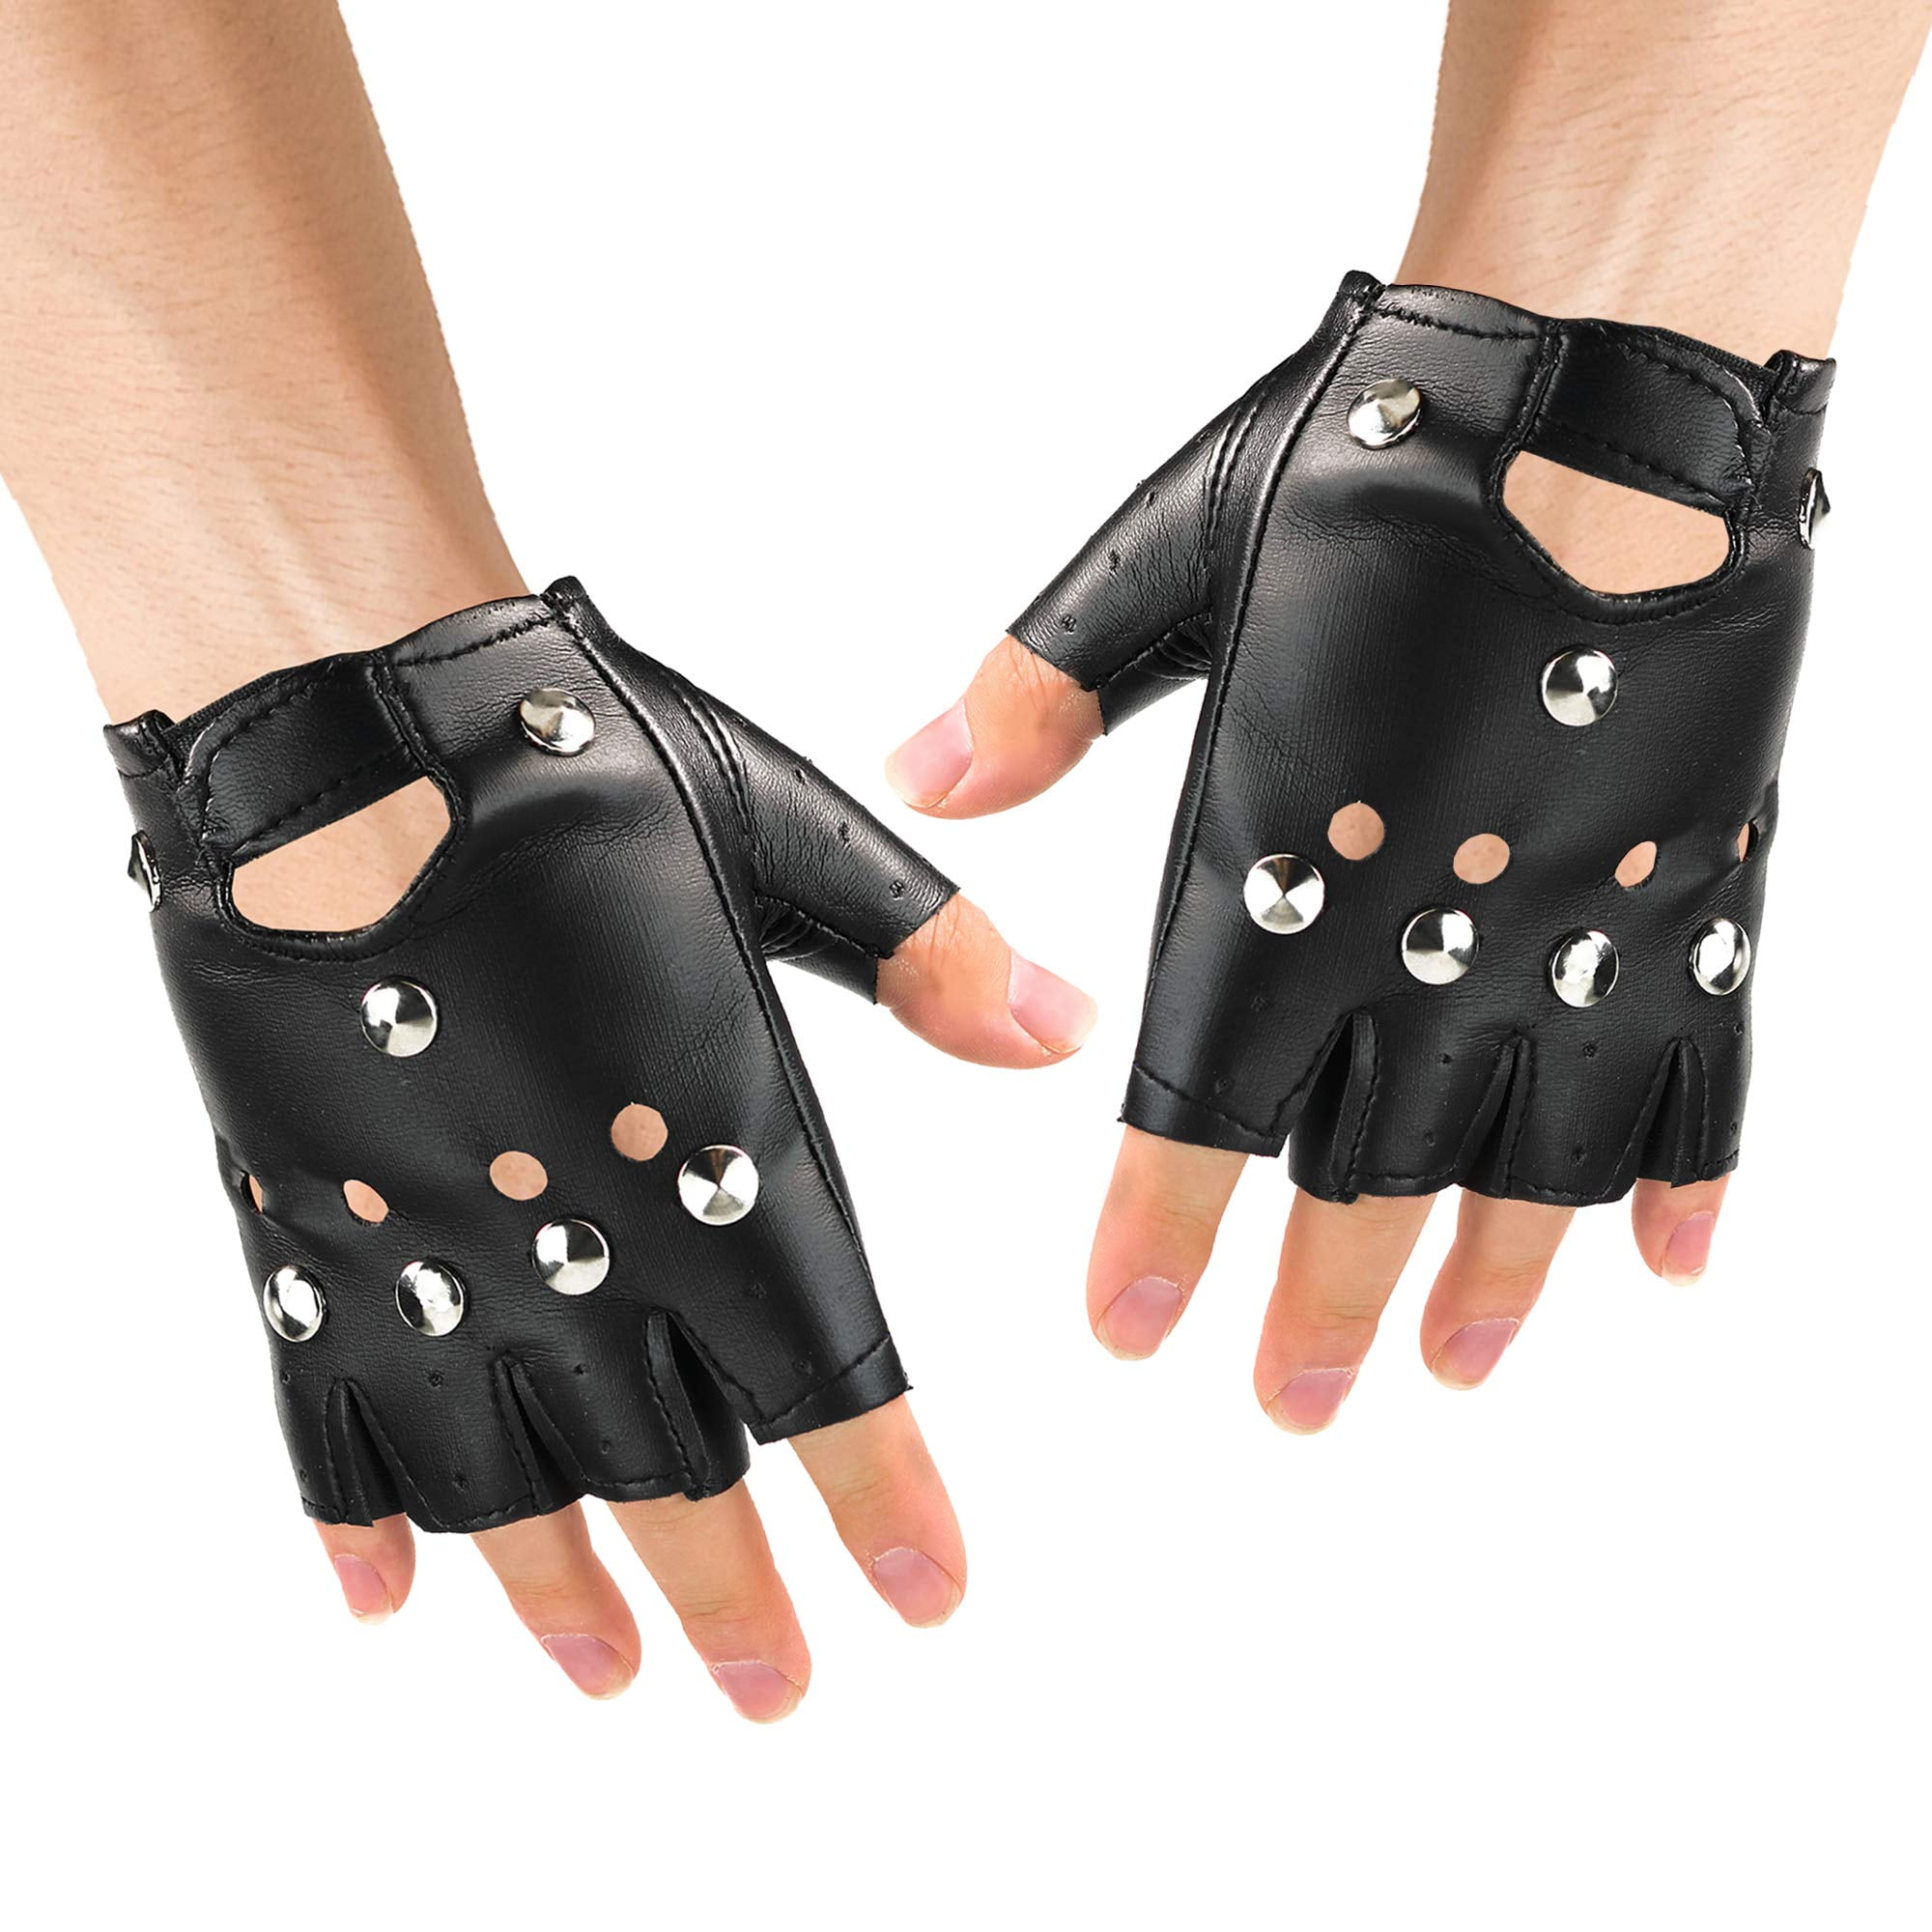 FINGERLESS STUDDED BIKER PUNK GLOVES DRIVING GLOVES FAUX LEATHERS CYCLING GLOVES 